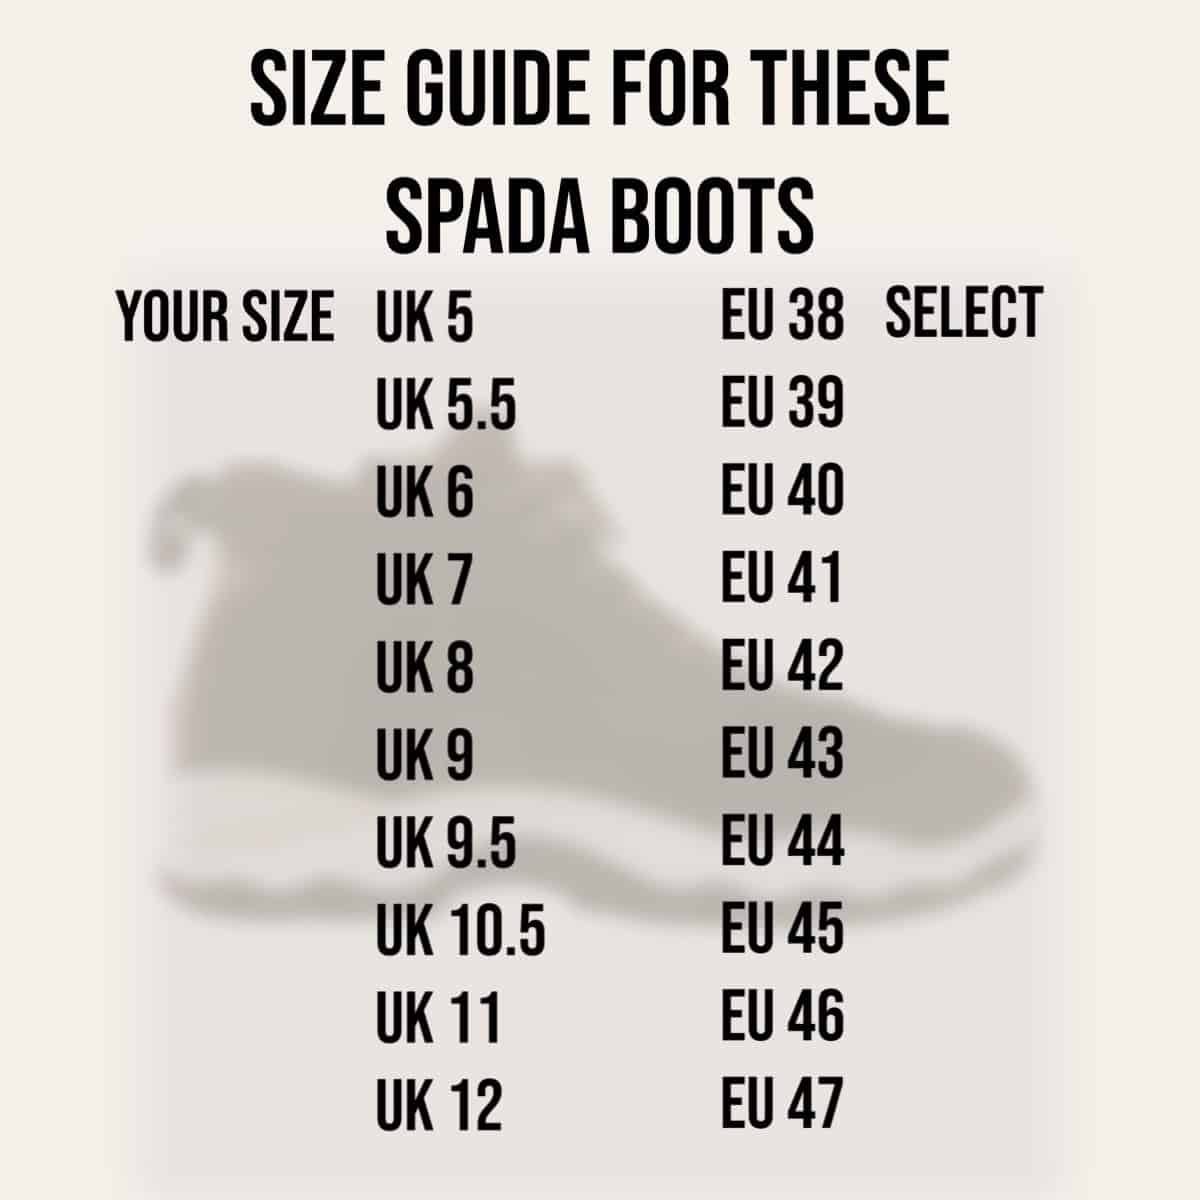 The Spada Mercury motorcycle trainers are an awesome addition to the casual riding boots category. Designed to look just like your favourite Highstreet trainer, these motorcycle shoes have both road and weather protection - size guide